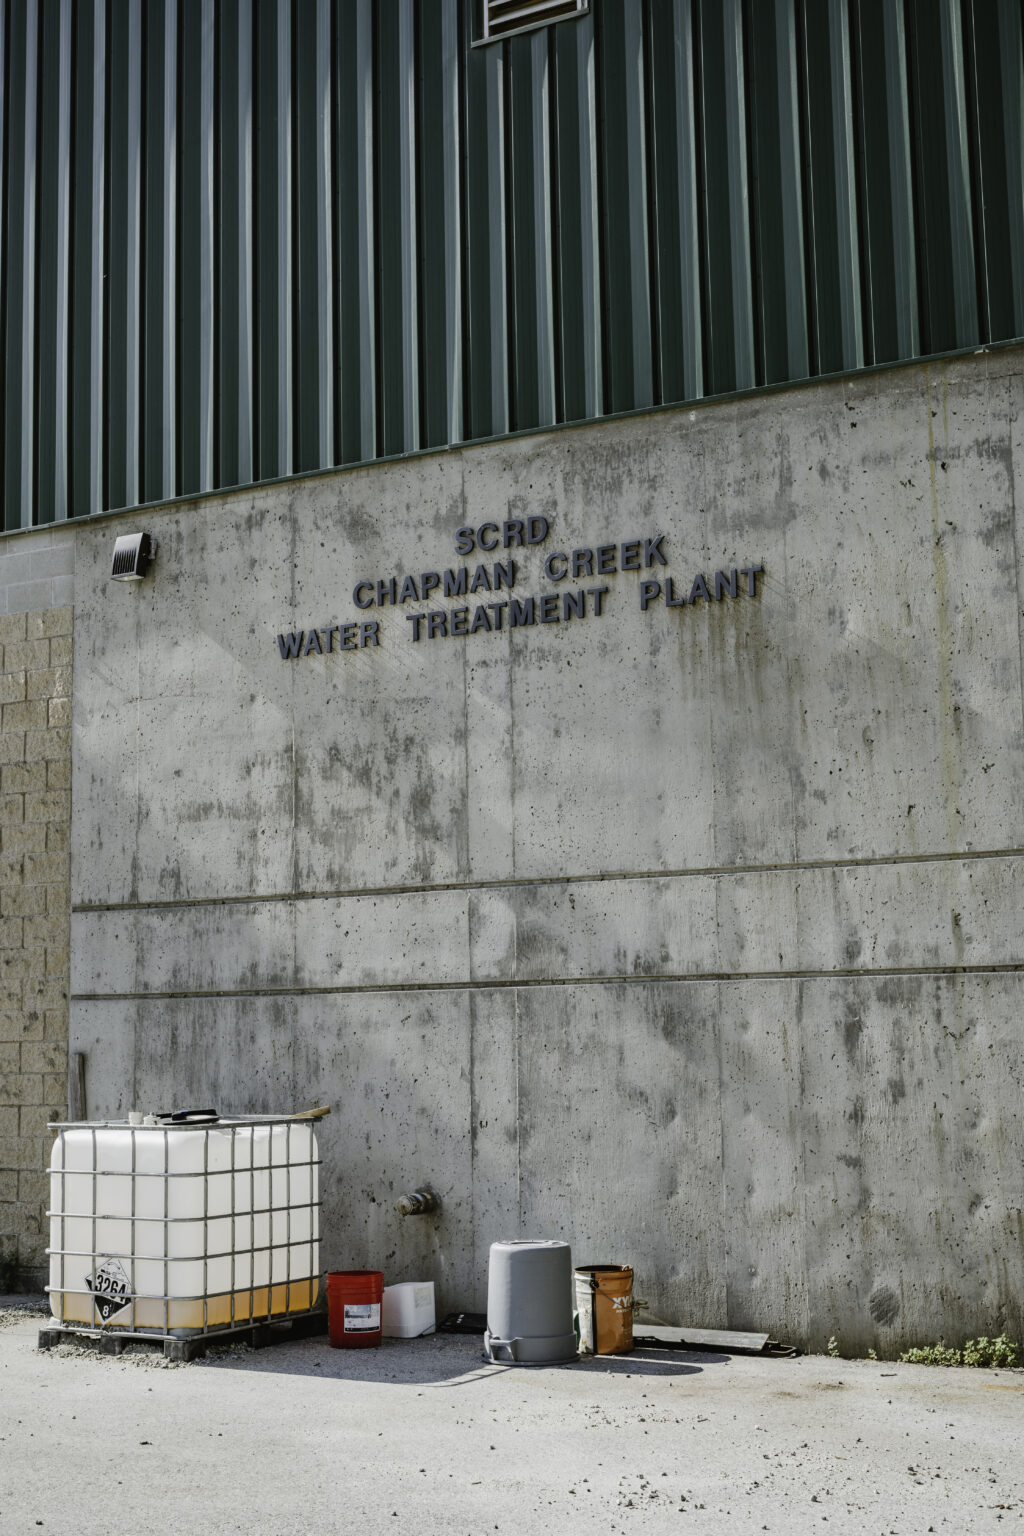 The Chapman Creek water treatment plant, which provides water for Sunshine Coast residents.